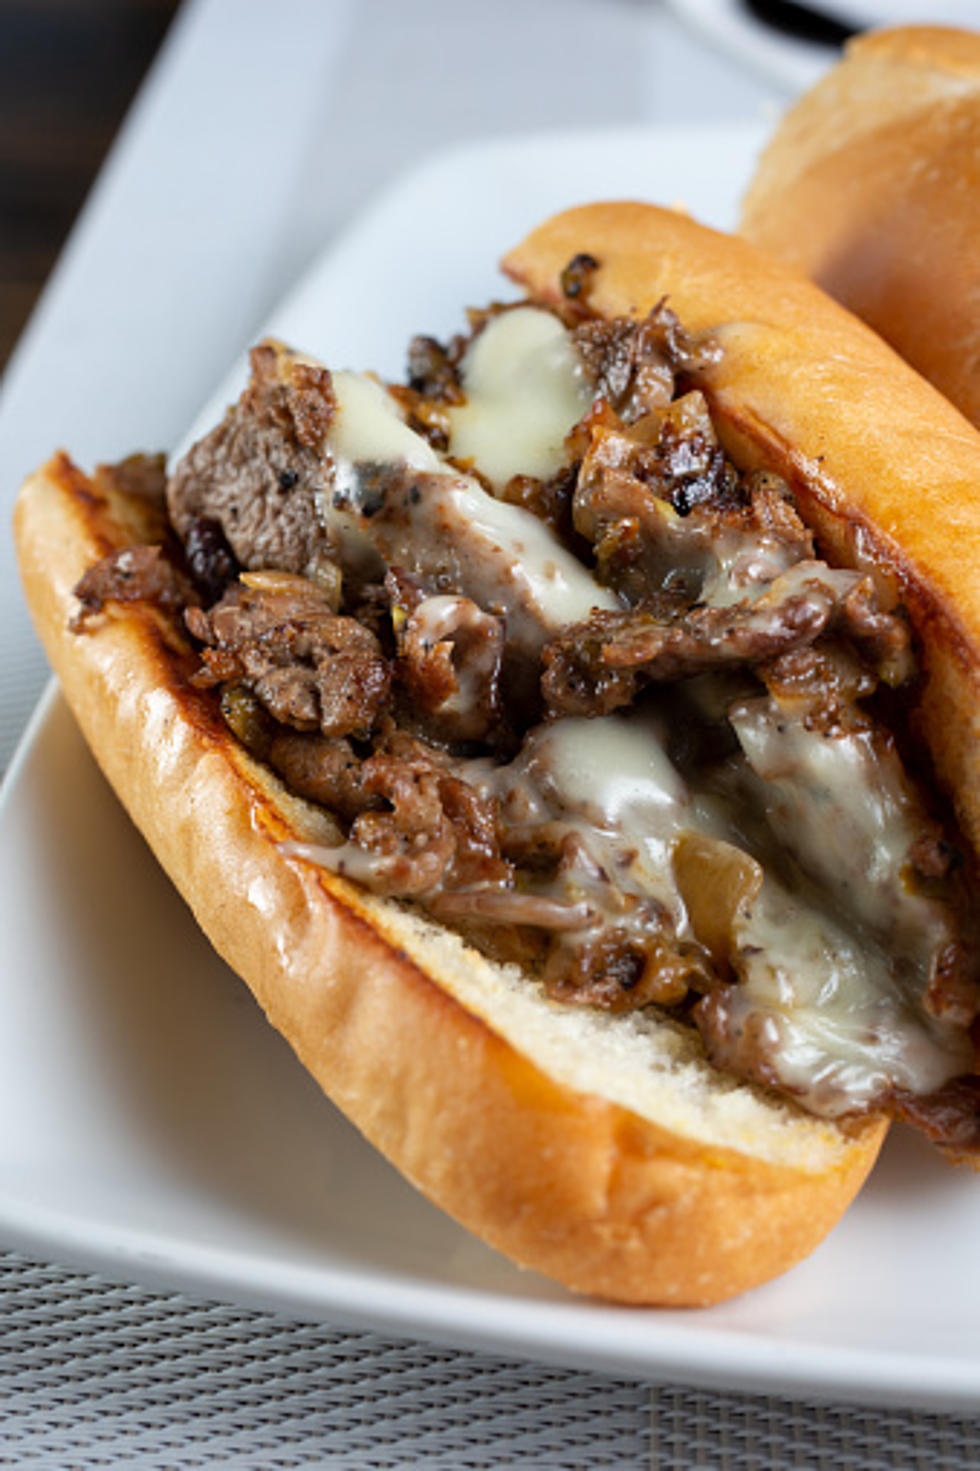 Portsmouth, New Hampshire, Sub Shop Gets National Recognition for Their Steak Bomb